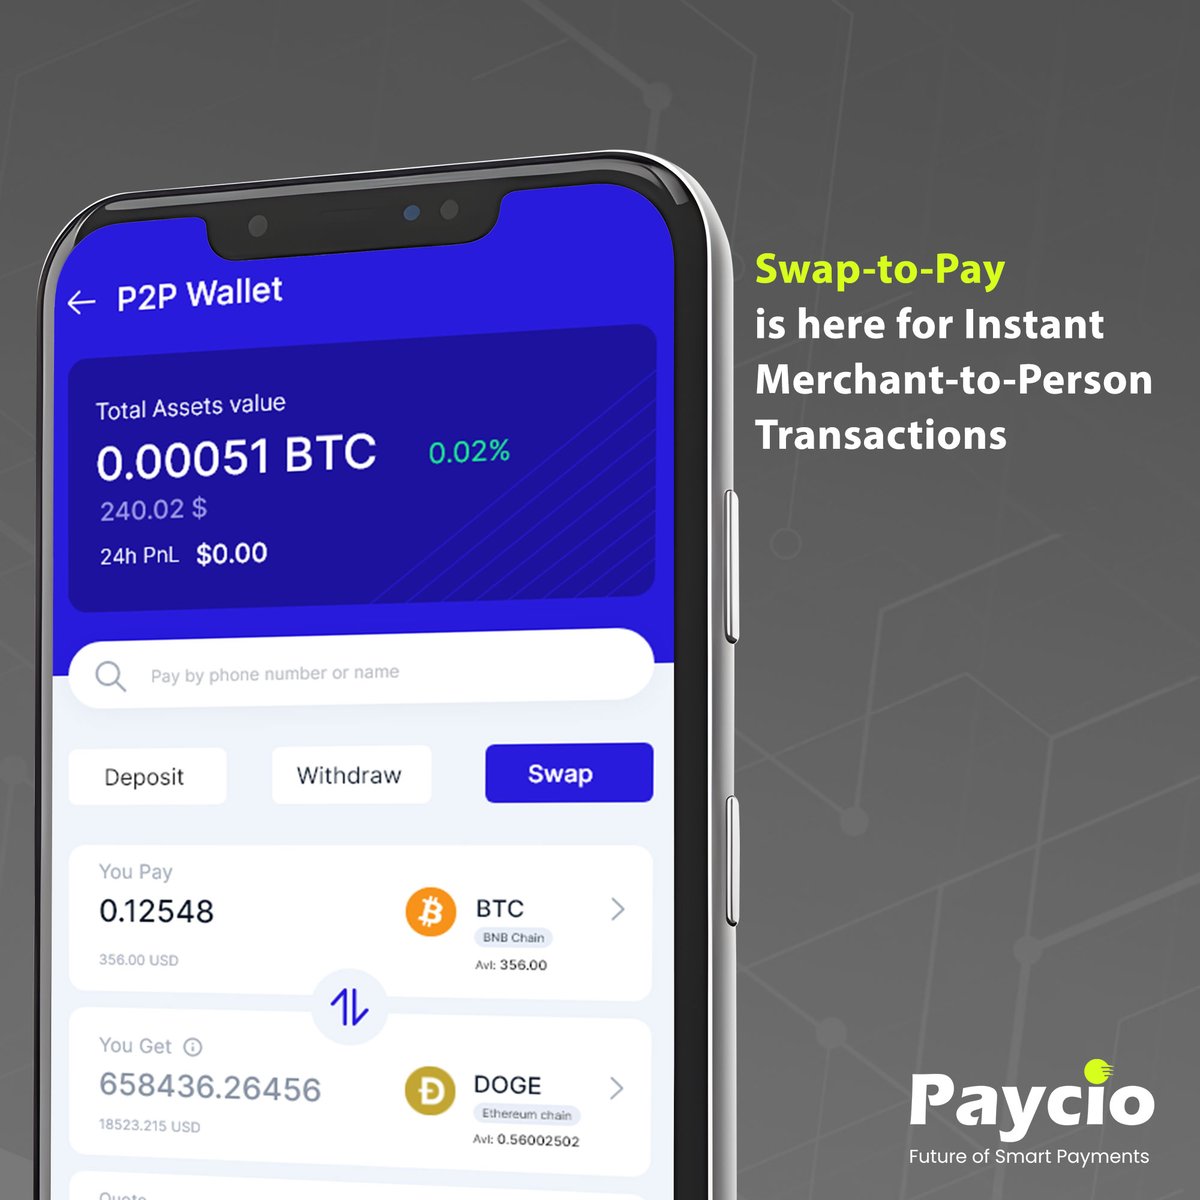 Switch to Paycio's Swap-to-Pay for instant, secure merchant-to-person payments! Why lag behind with slow processes when you can ensure compliance and speed with every transaction? Here is a Glimpse: Instant Transactions: Seamlessly execute merchant-to-person payments without